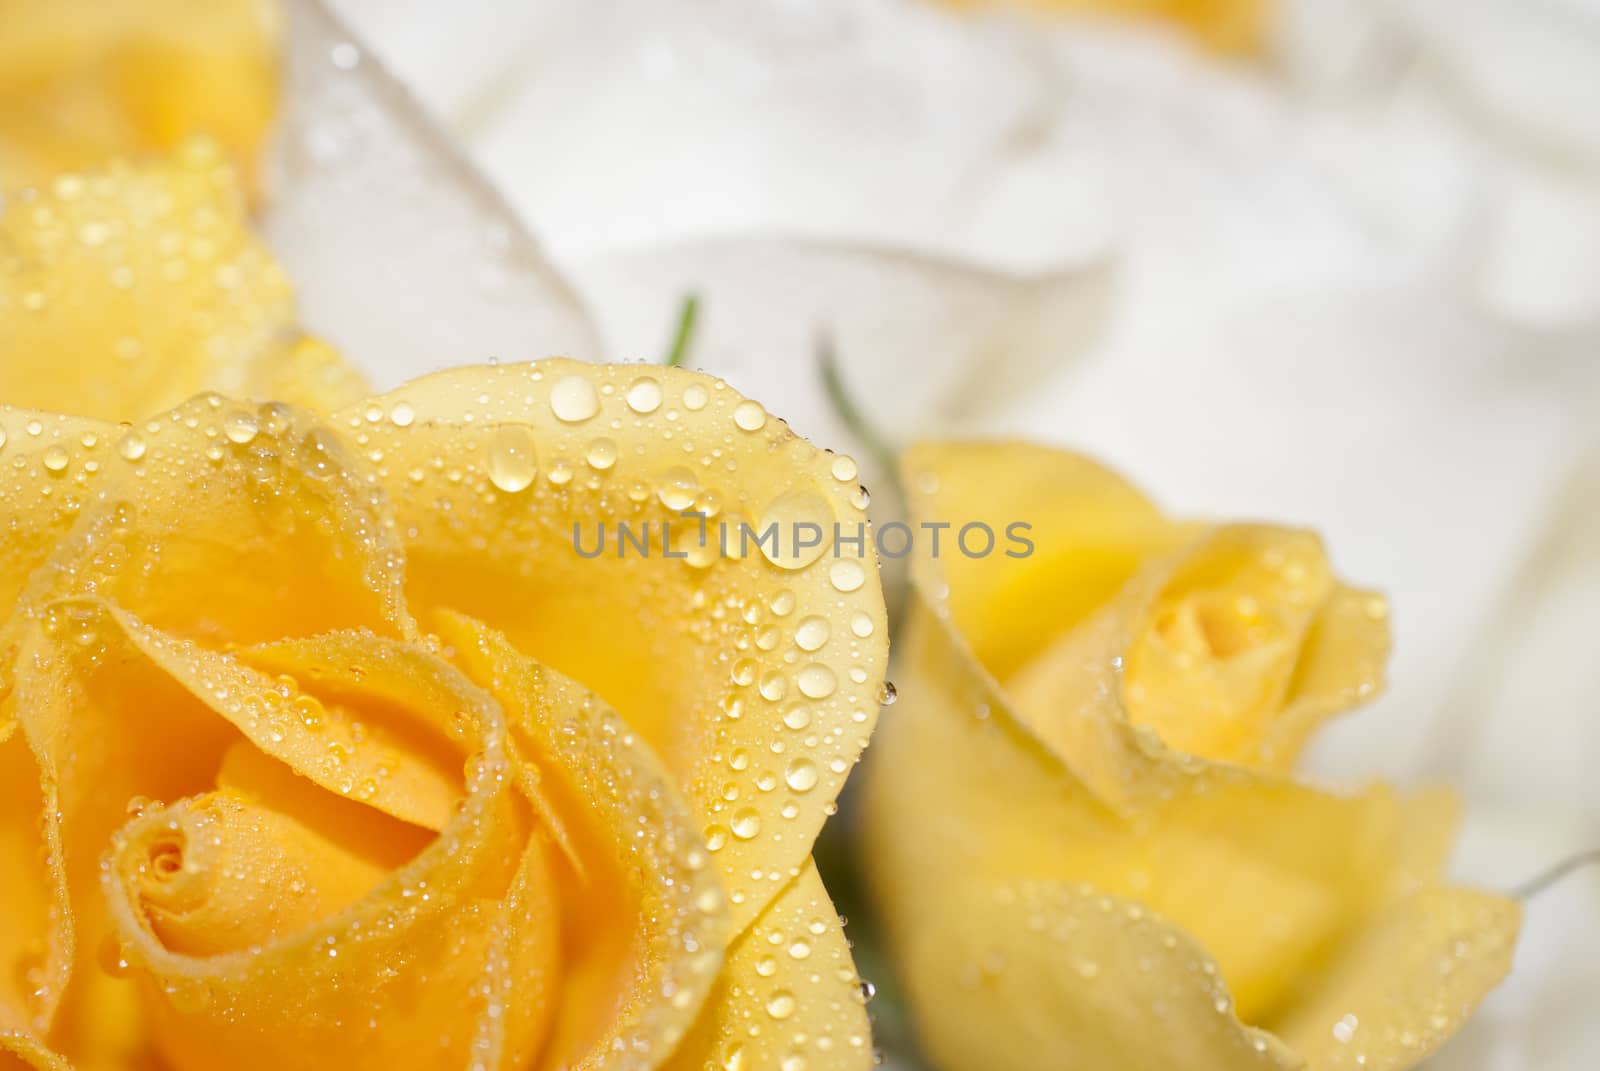 Roses with Water Drops by marcrossmann